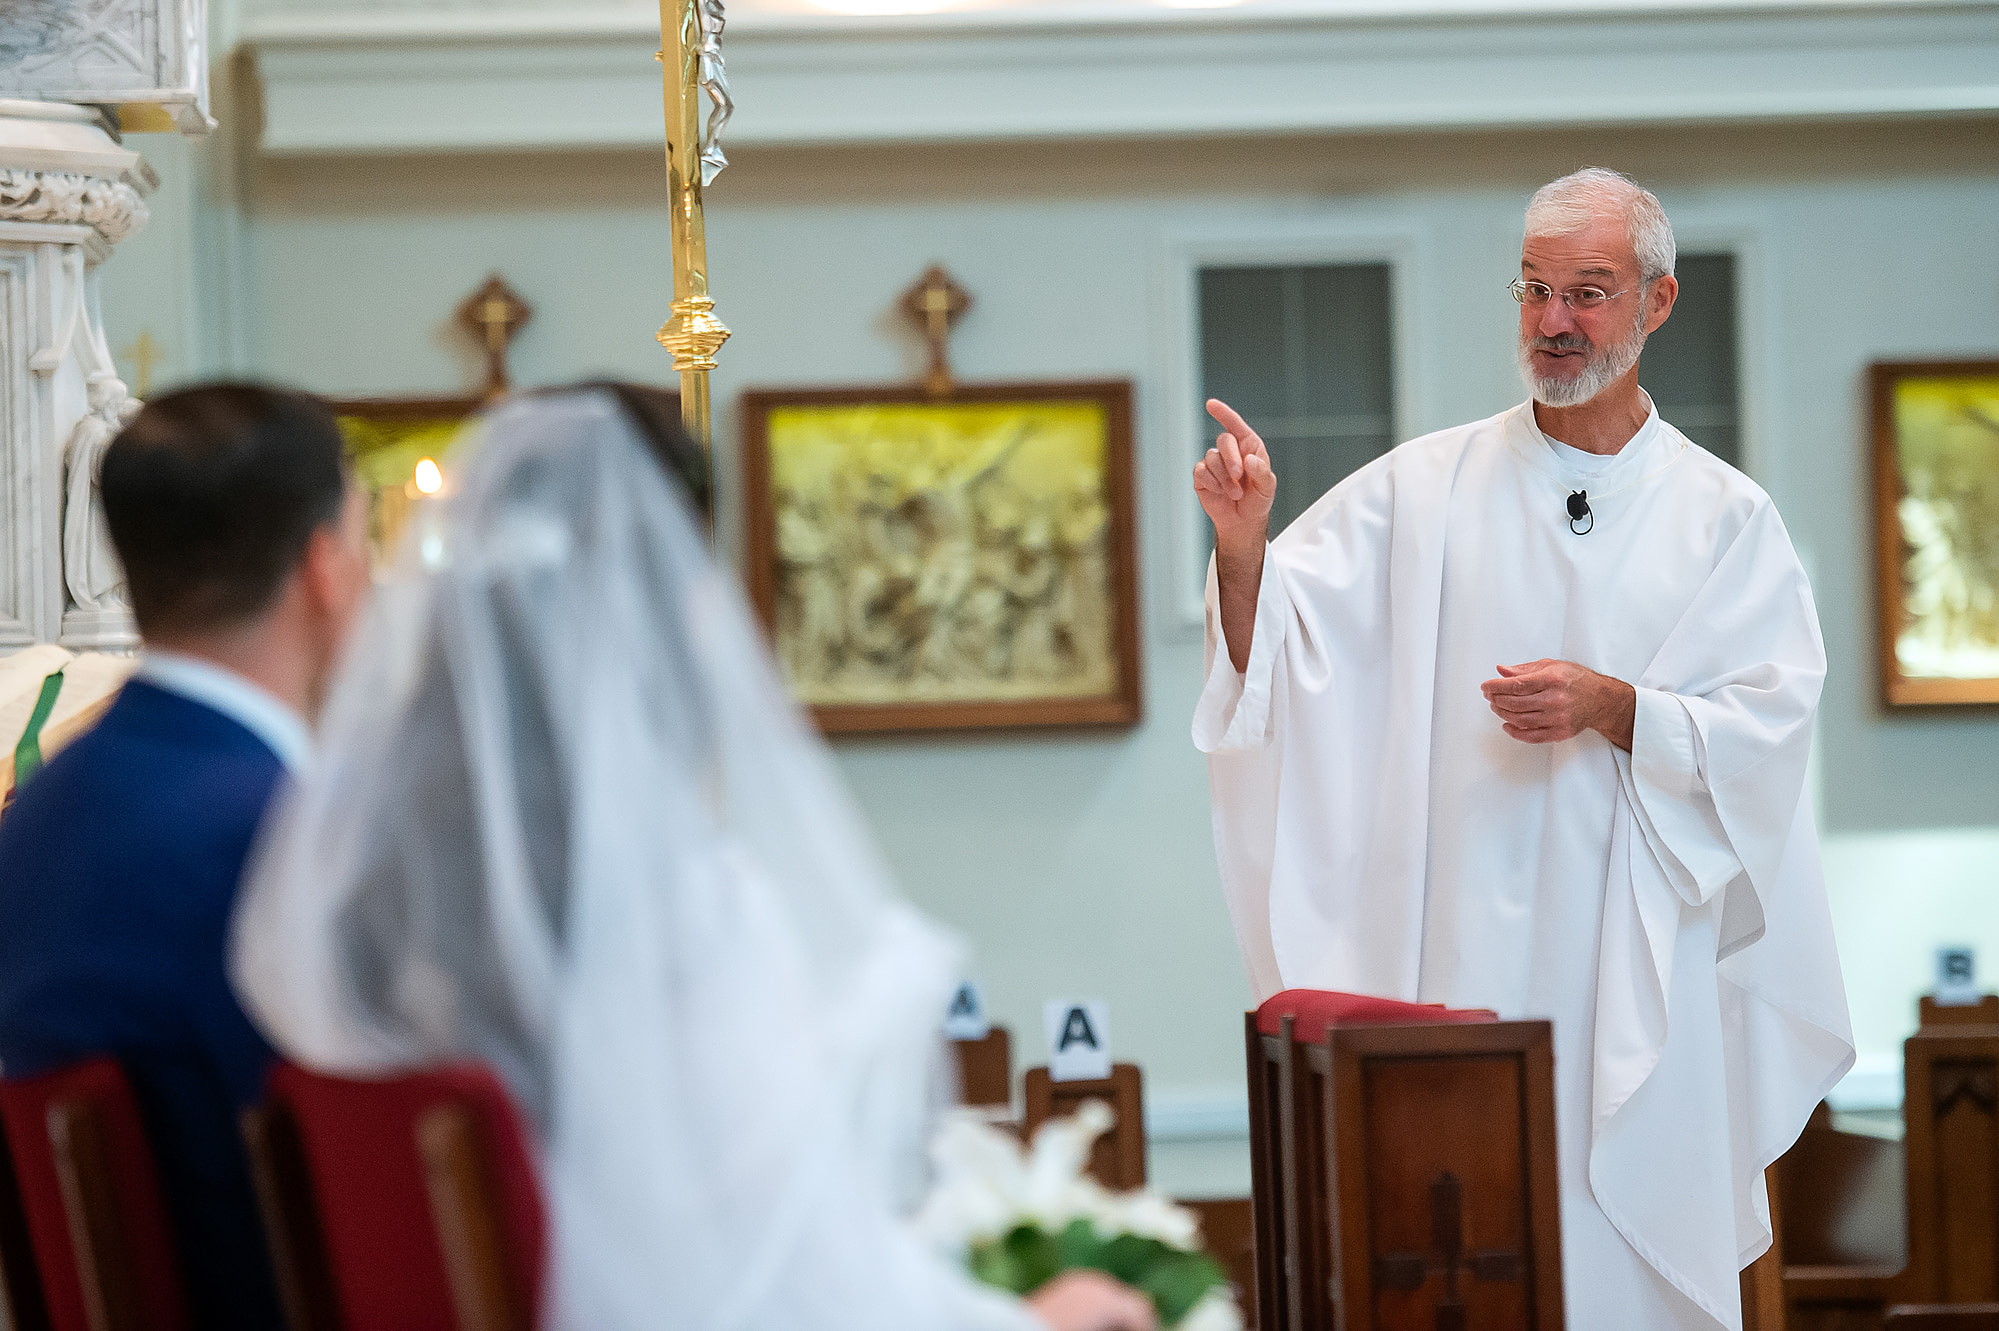 Fr. John Riley preaches during a wedding at the Cathedral Basilica of the Immaculate Conception in Denver, Colorado.